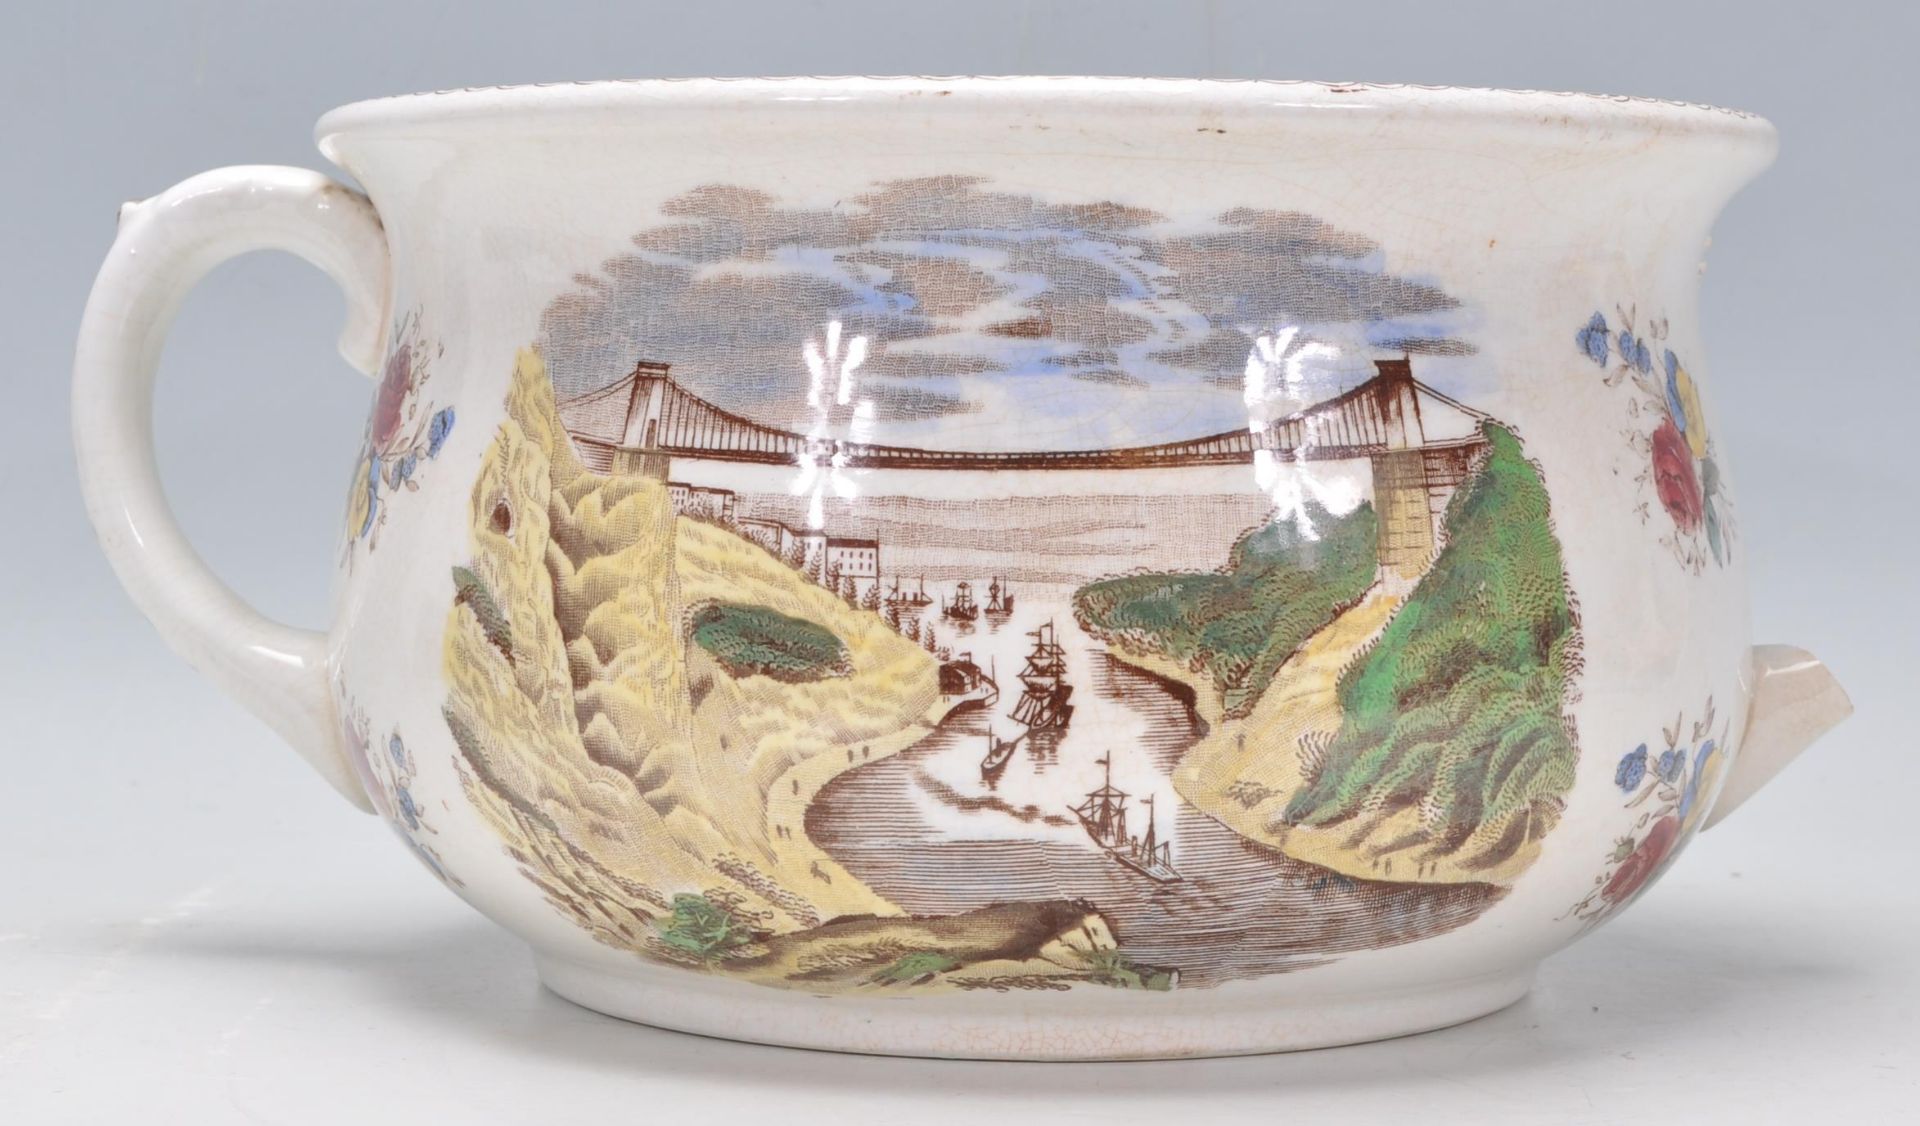 A 19th Century Victorian humorous pottery chamber pot. The interior decorated with two figures in